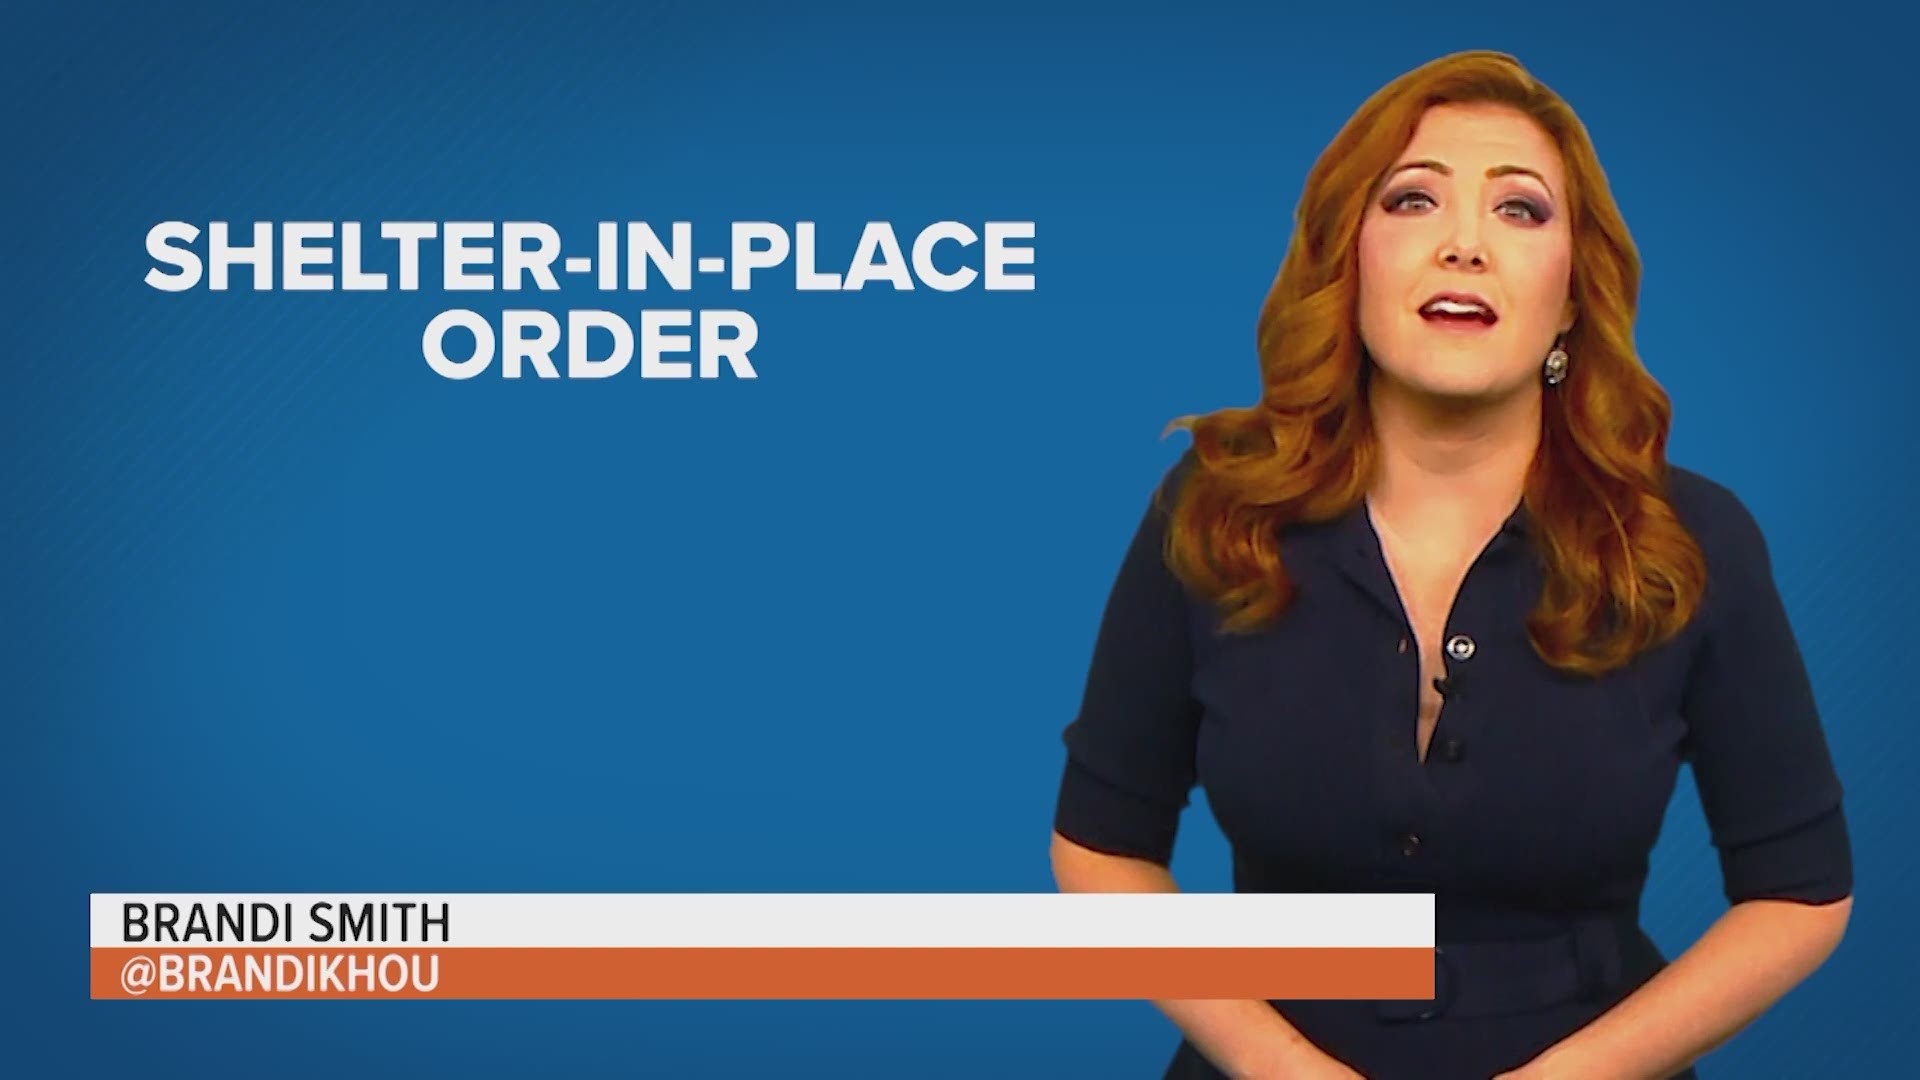 Brandi Smith breaks down what you need to do when a shelter-in-place order is issued.